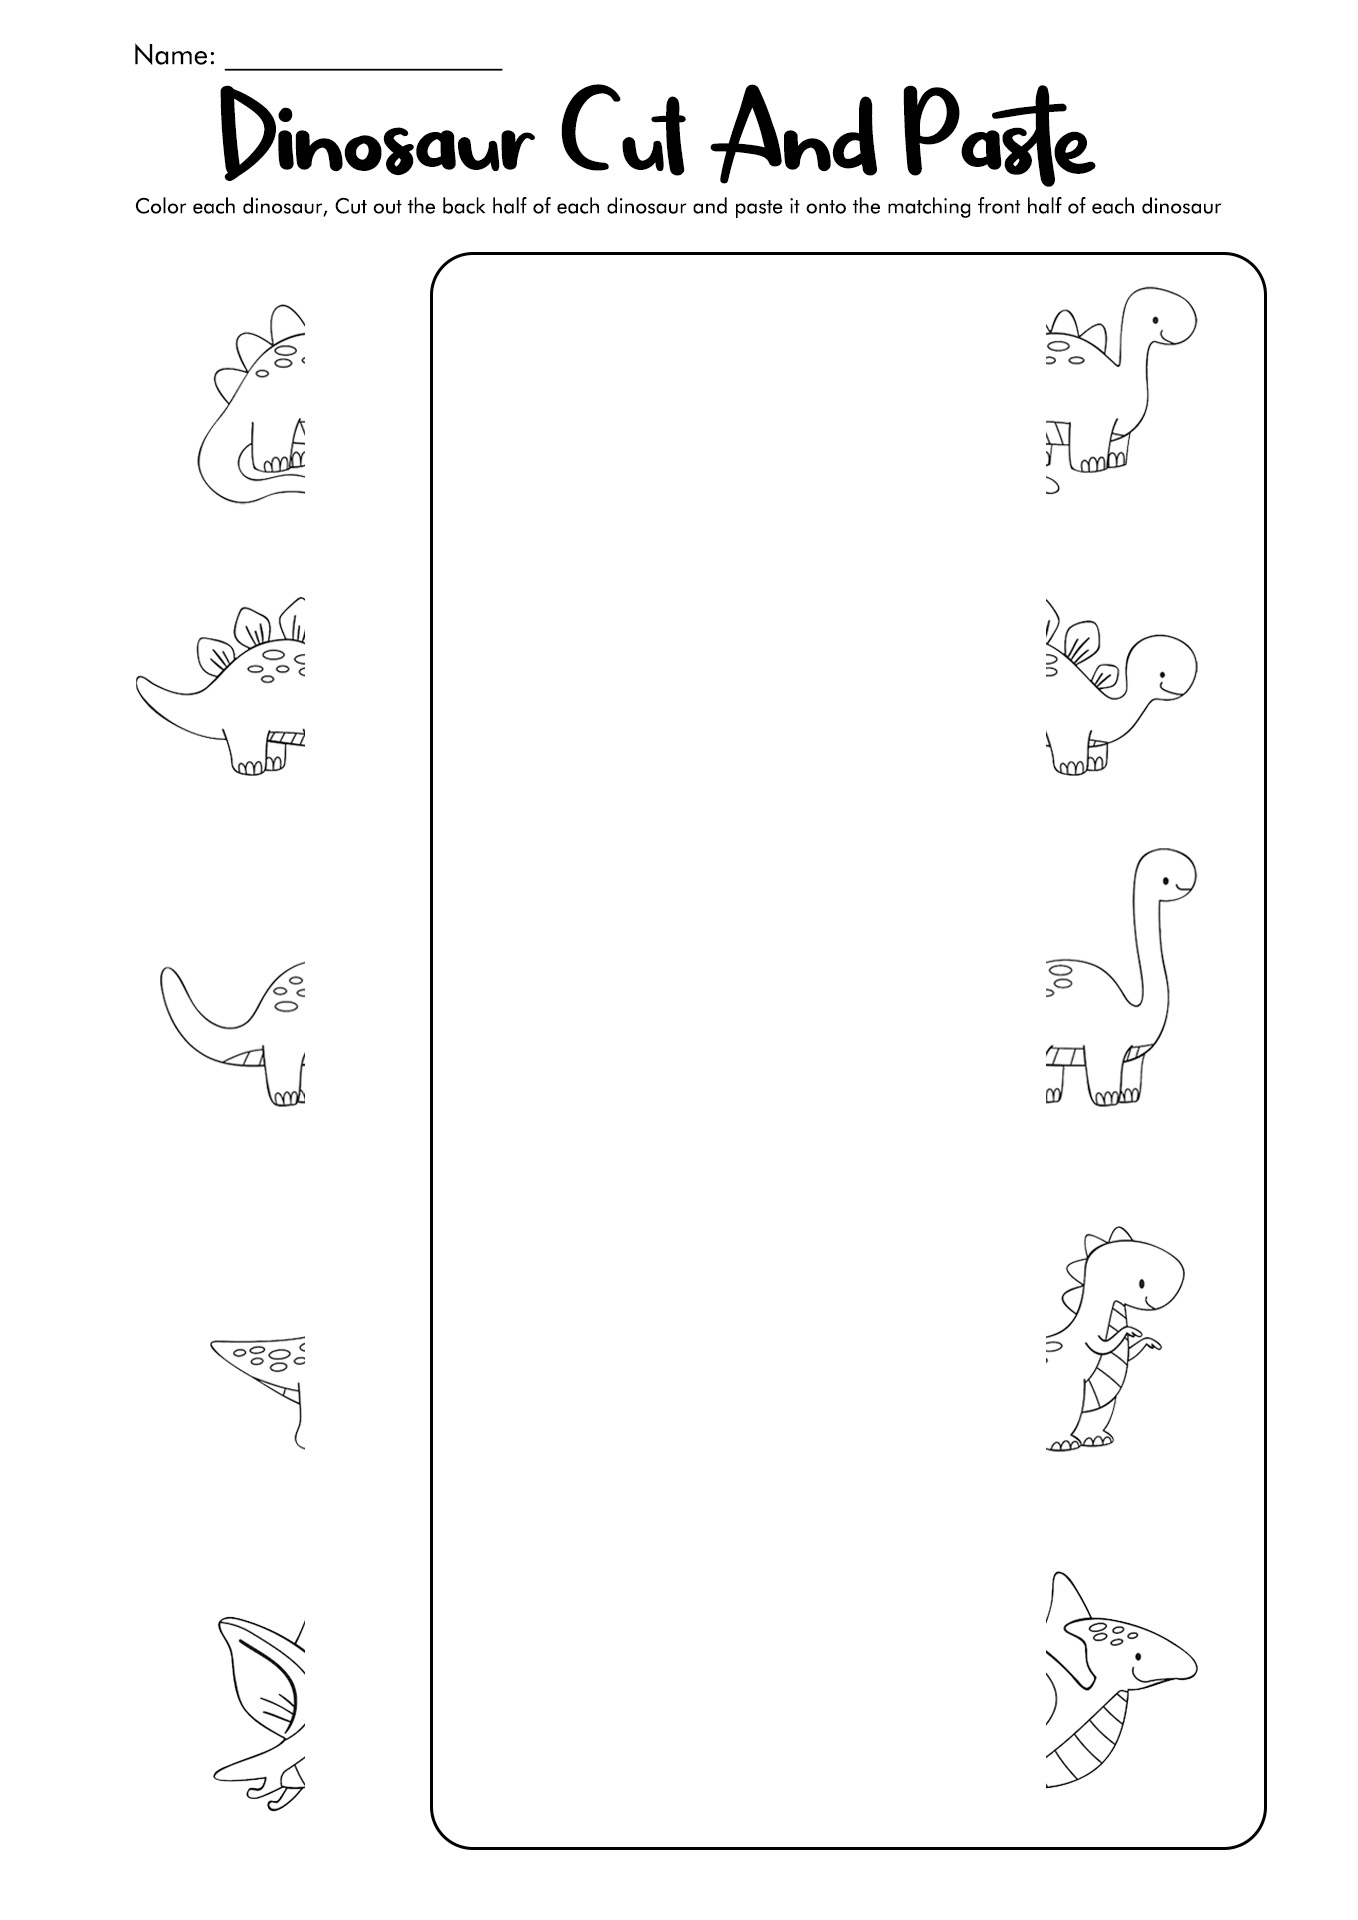 Dinosaur Cut and Paste Activities Image